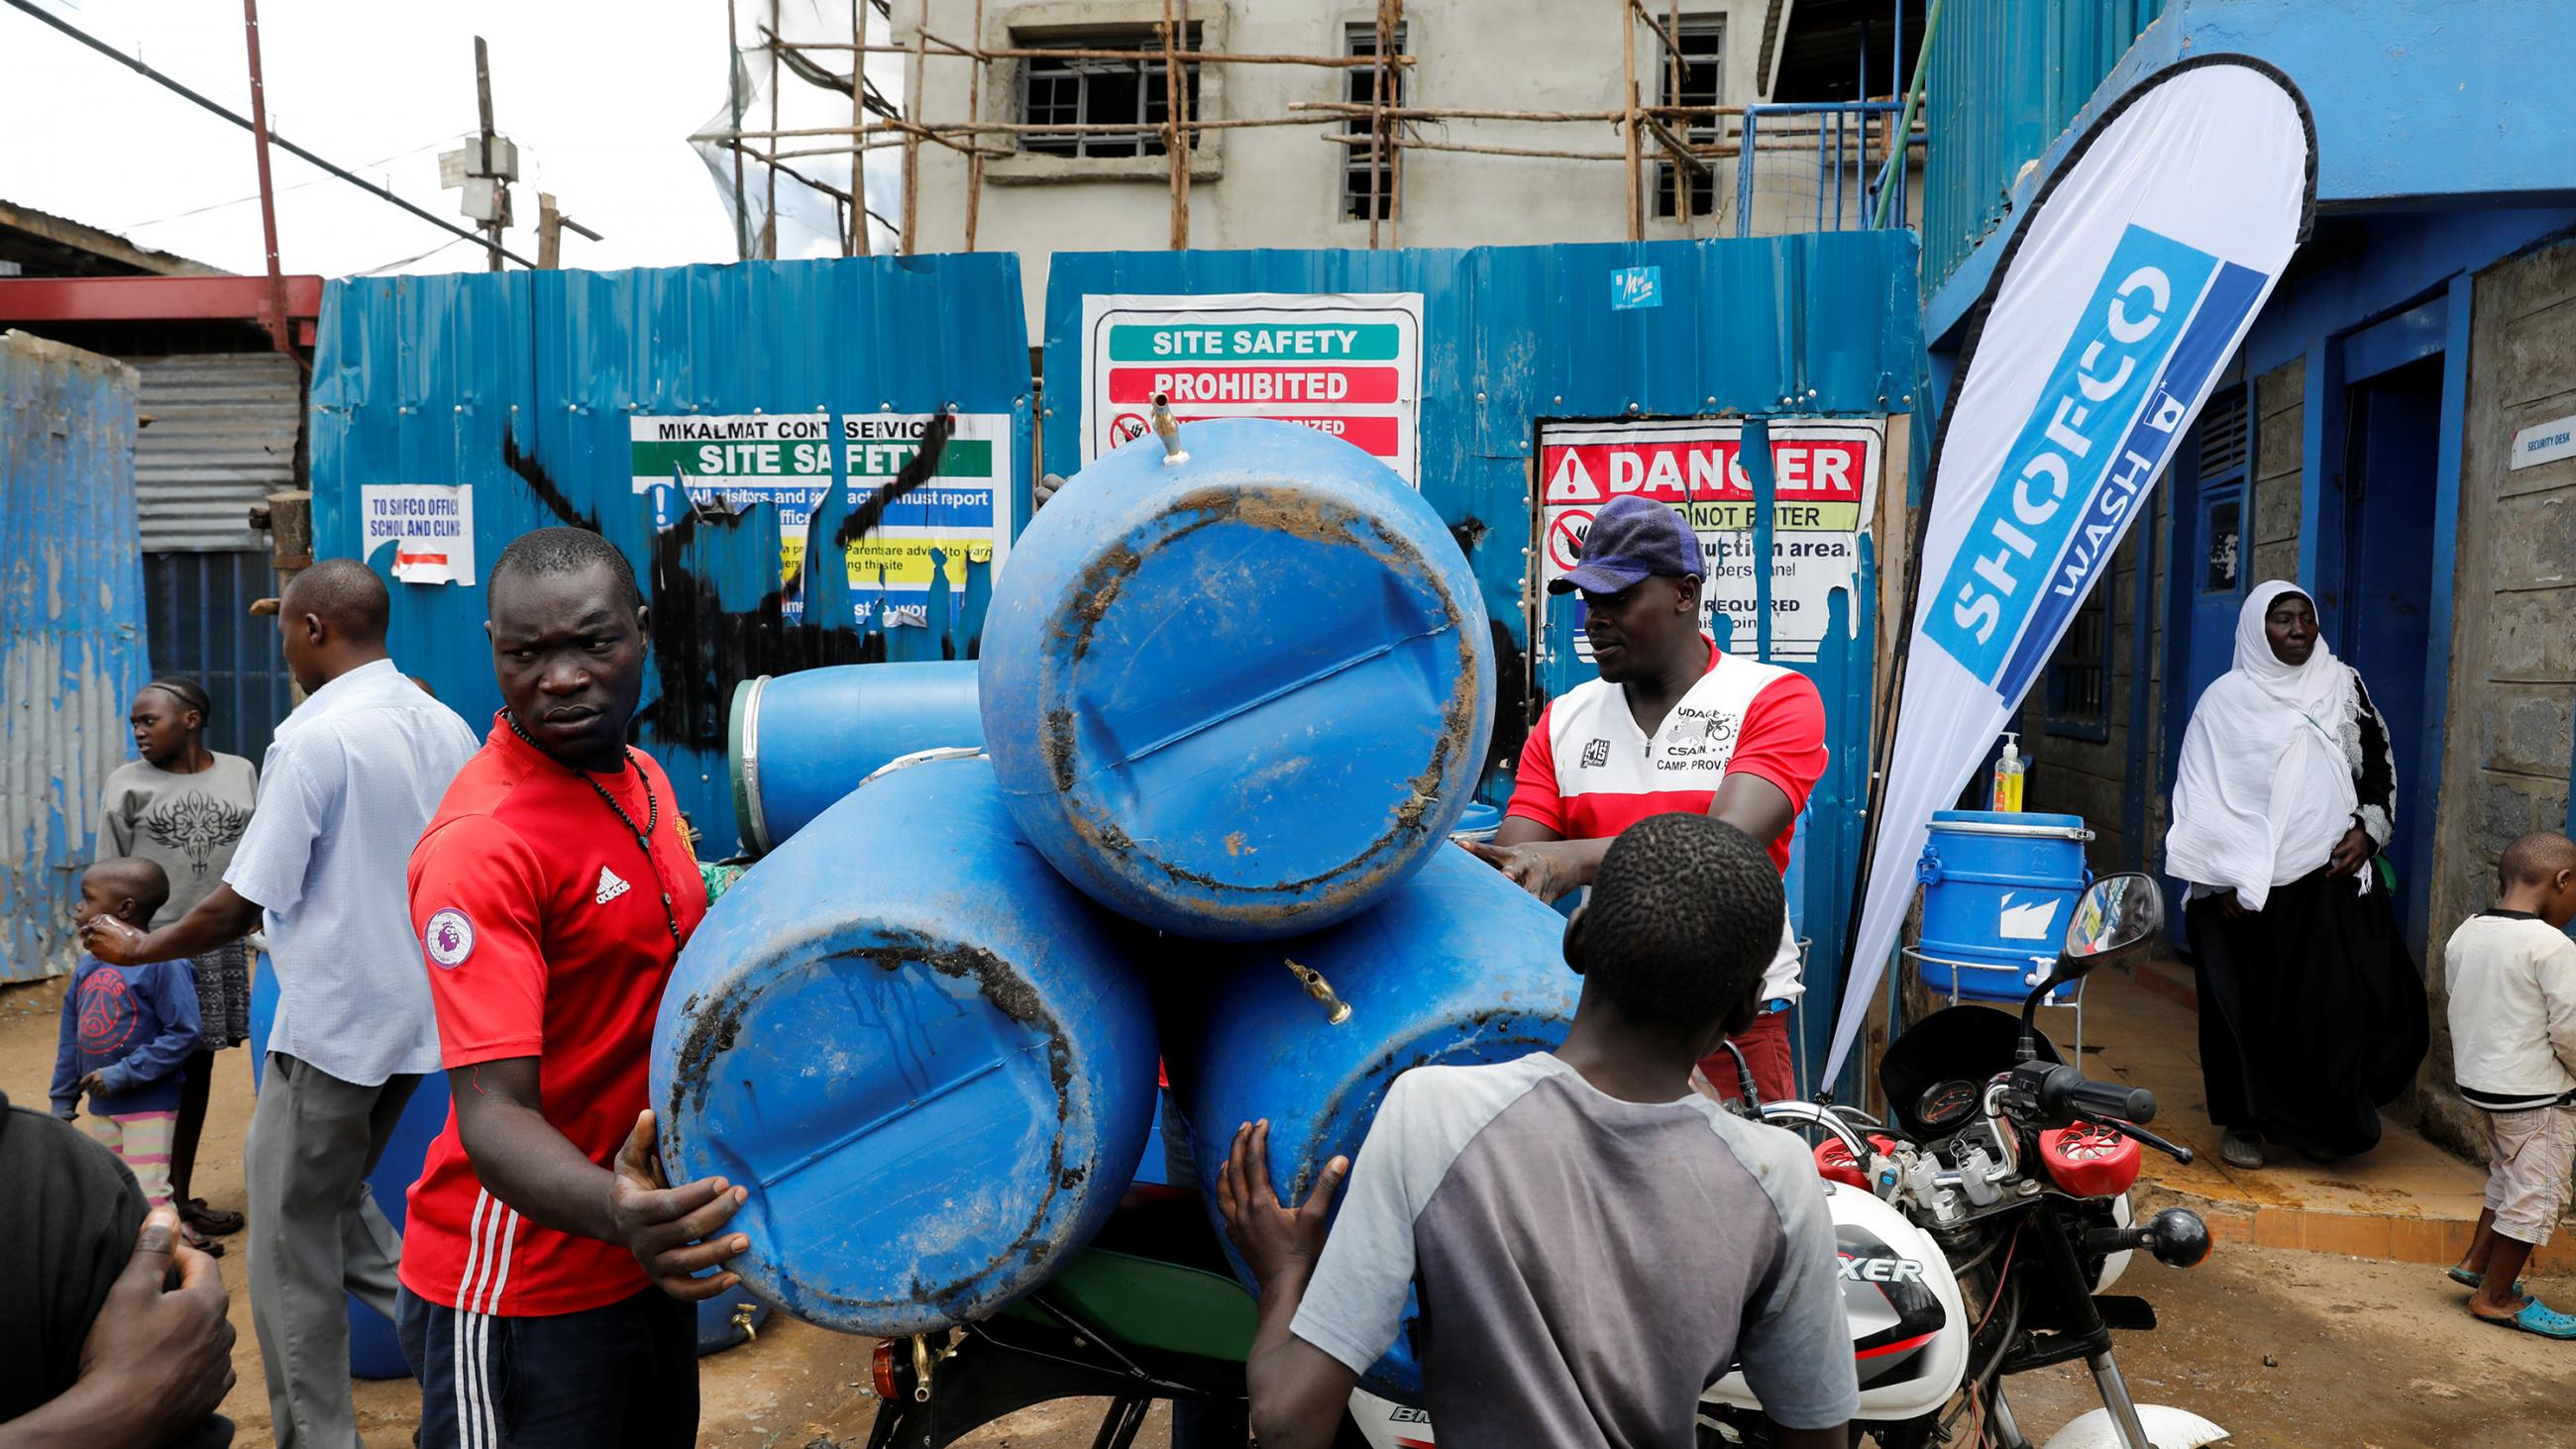 The photo shows a crowded street with people loading large blue barrels in the back of a bike. 